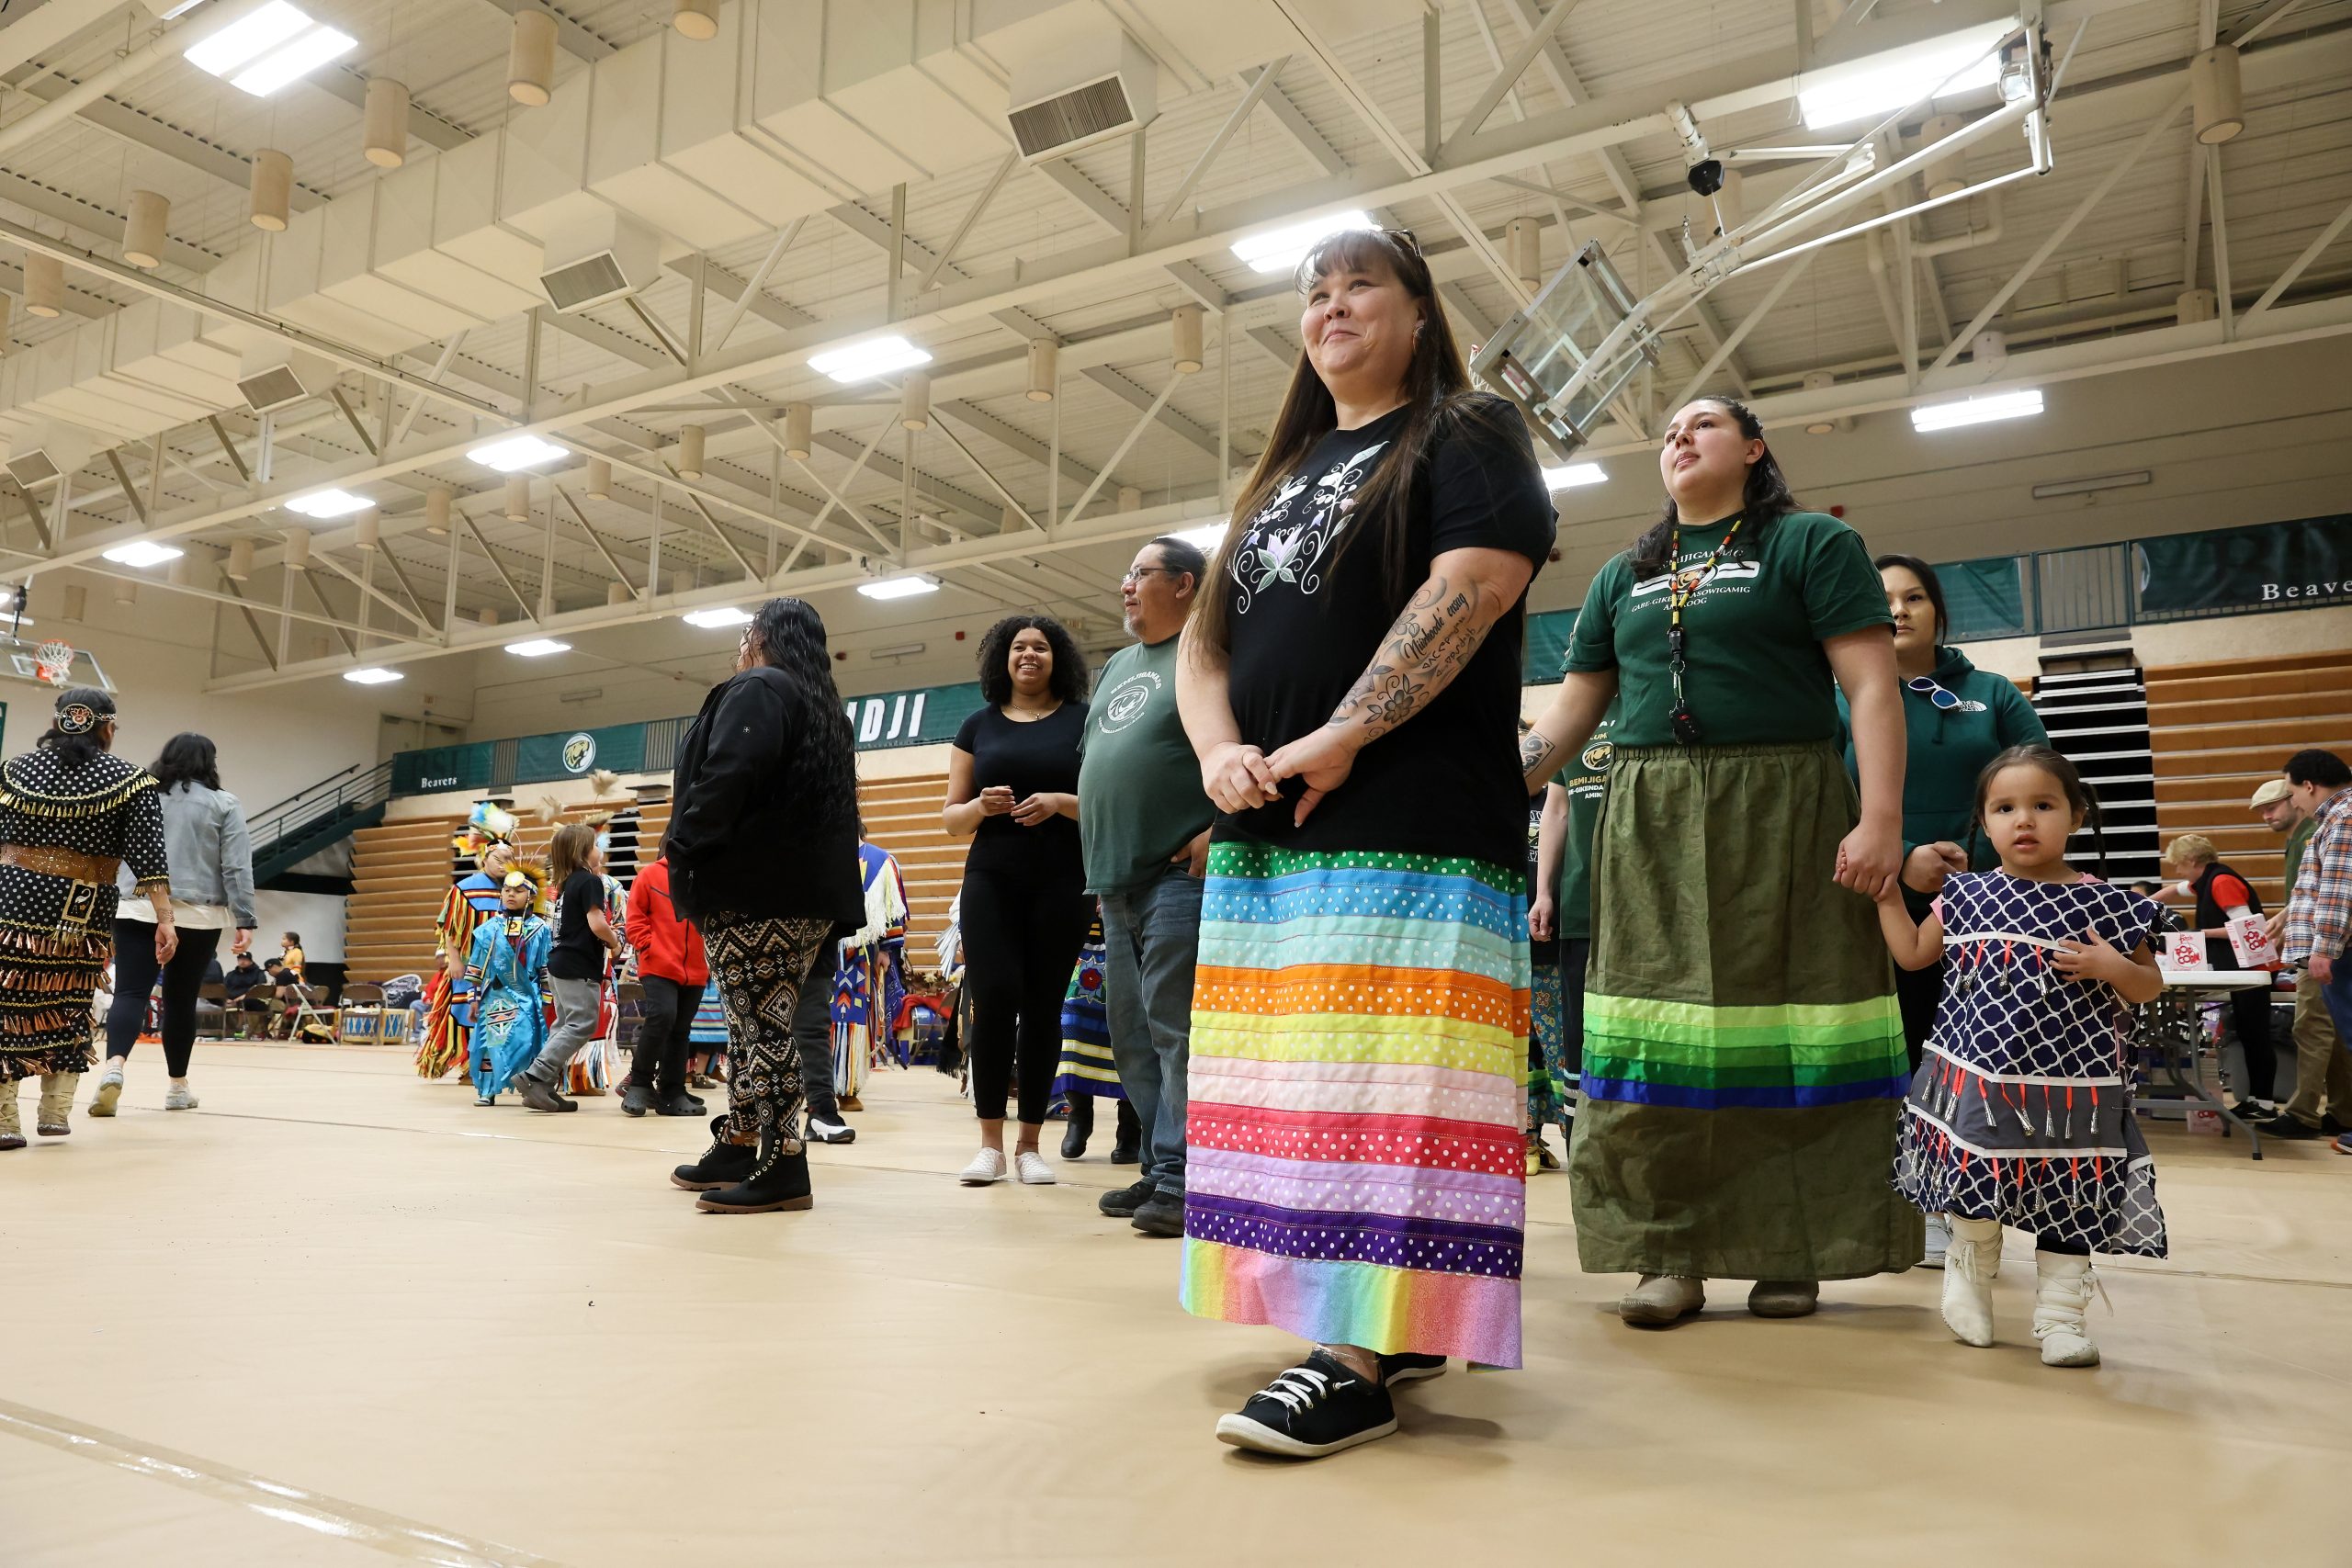 Chrissy Downwind standing in an auditorium during the 2023 BSU pow wow